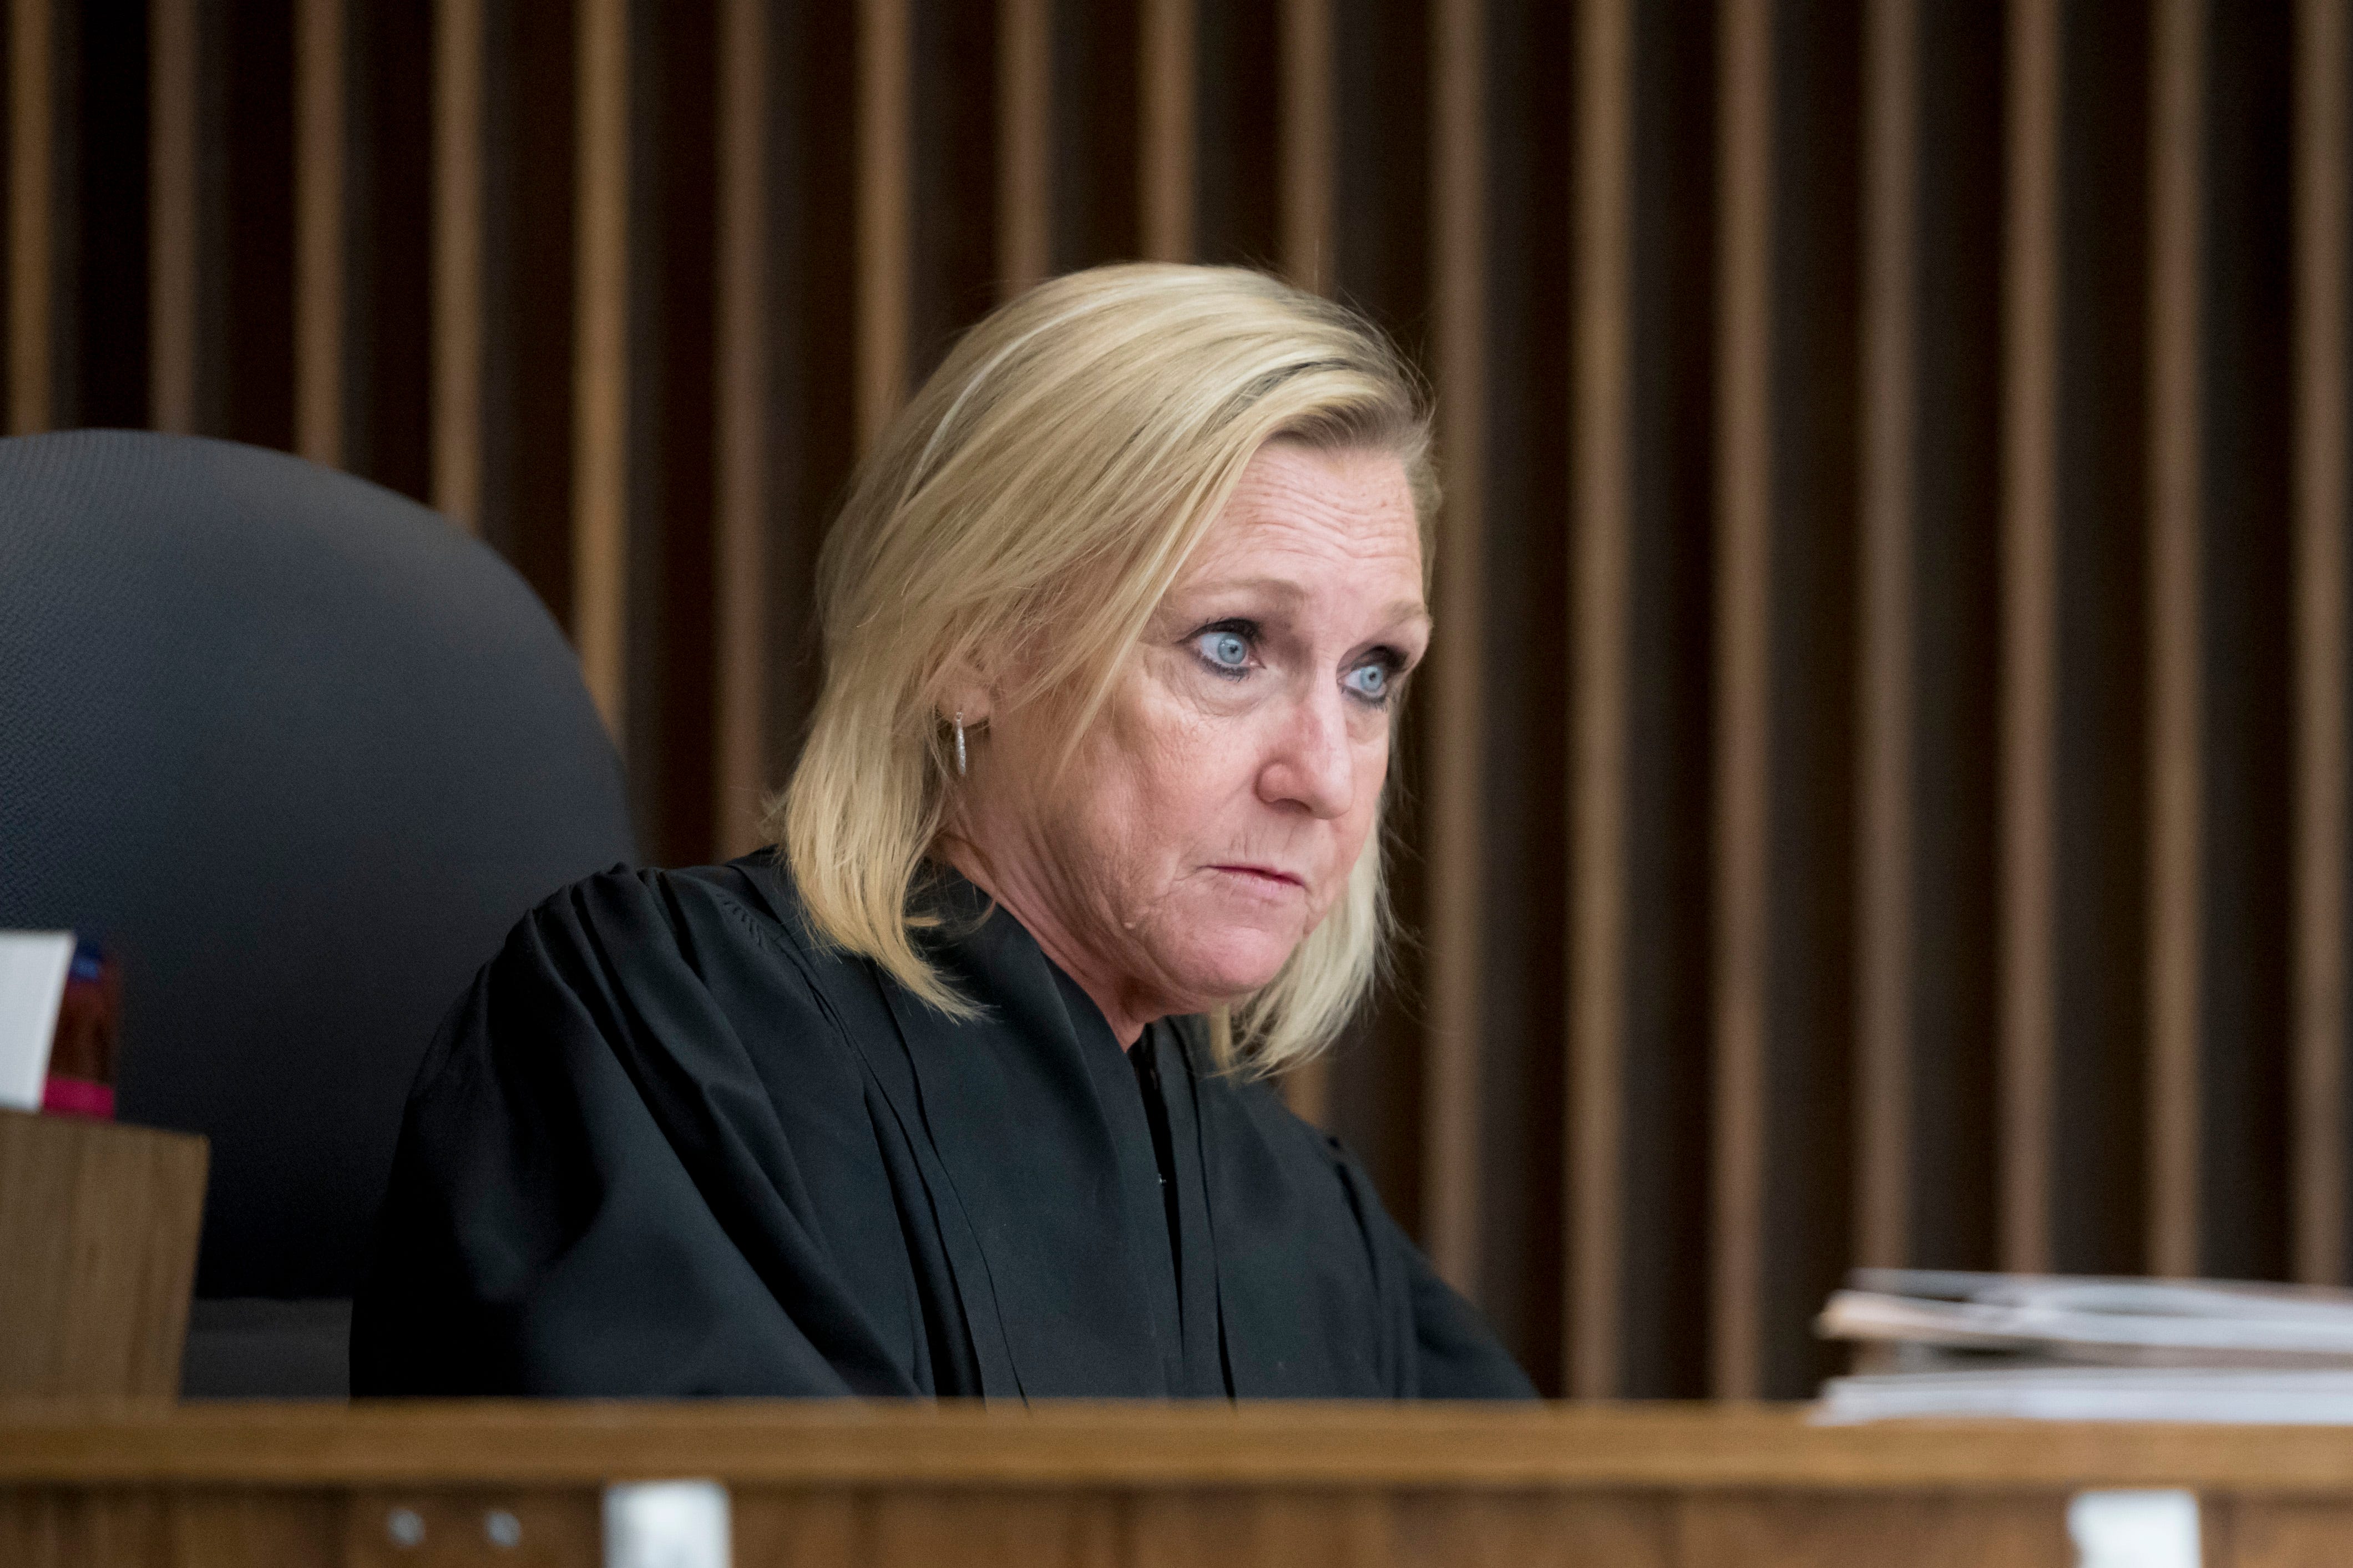 Judge Catherine Steenland at 39th District Court in Roseville, May 4, 2017.